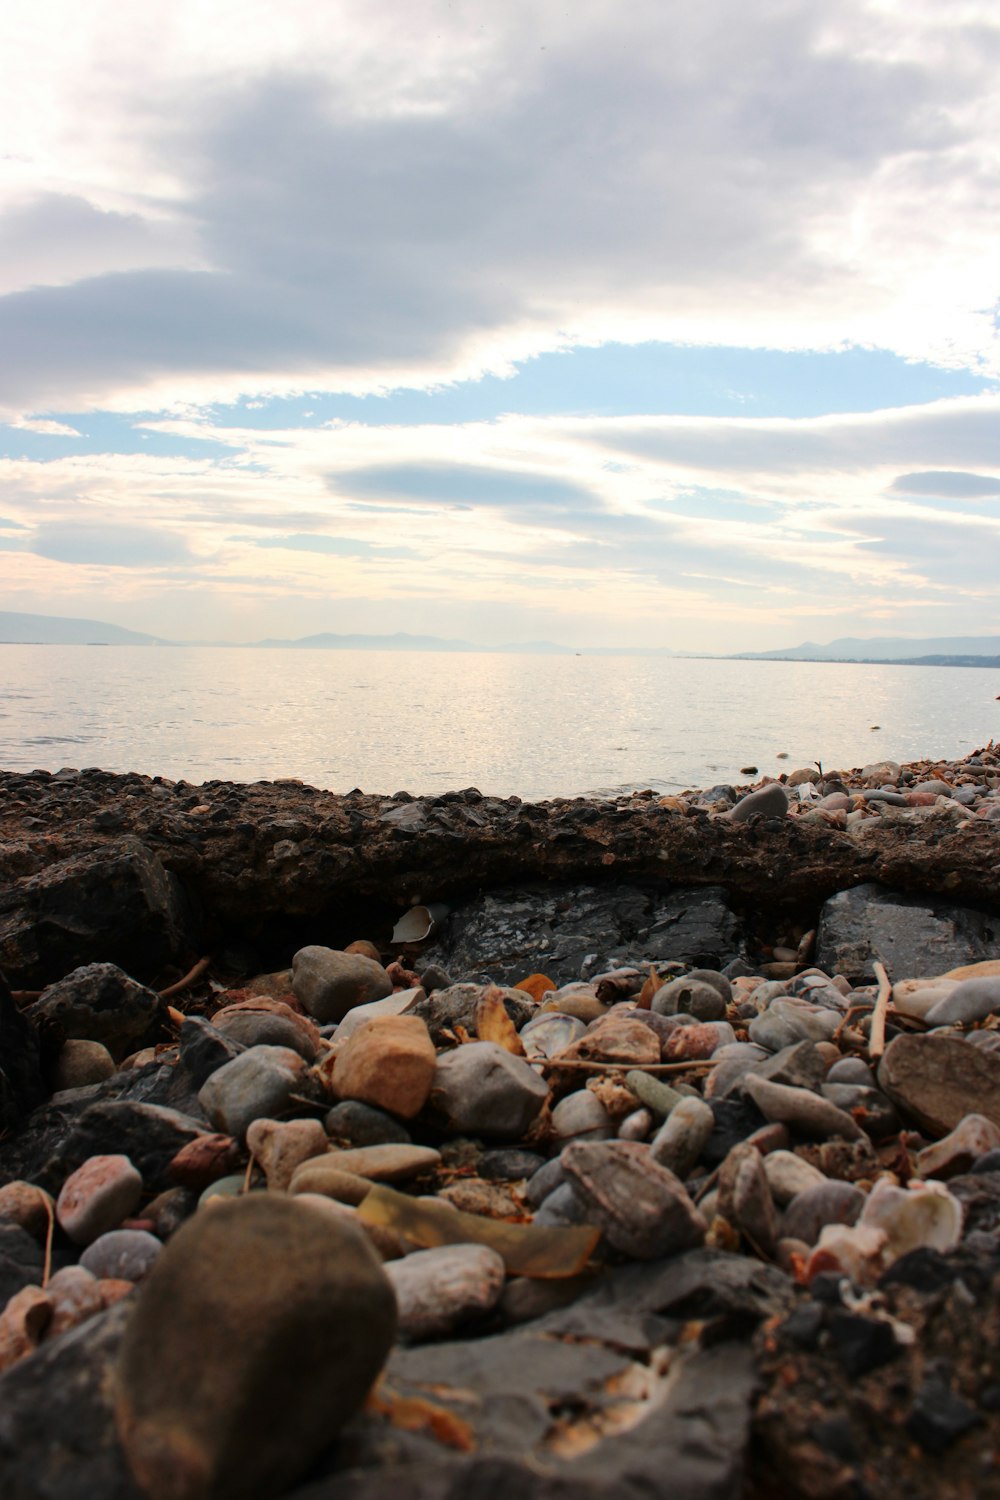 rocks and gravel on the shore of a body of water